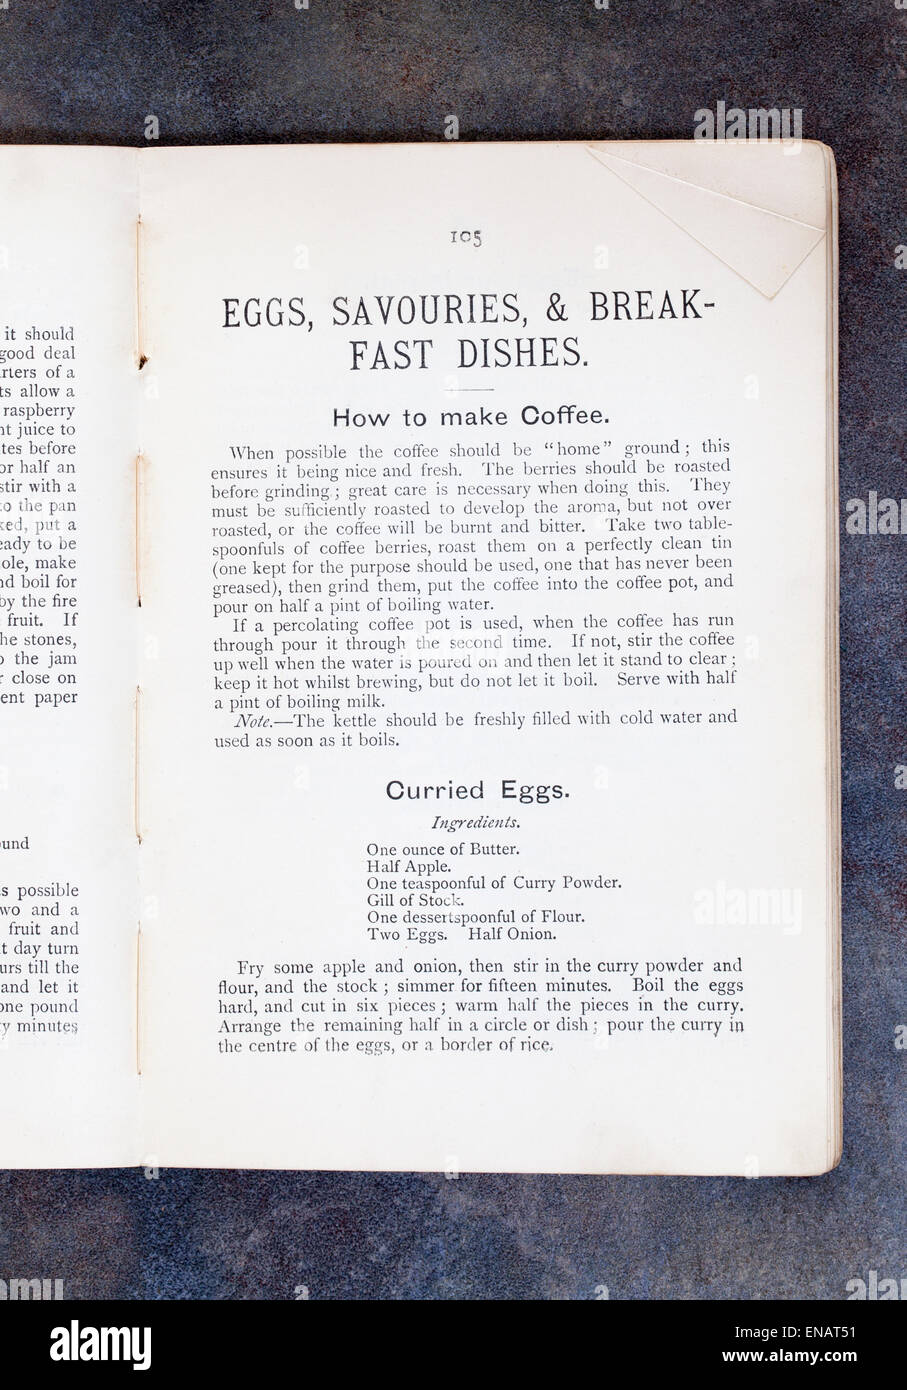 Eggs, Savouries and Breakfast Dishes from Plain Cookery Recipe Book by Mrs Charles Clarke Stock Photo